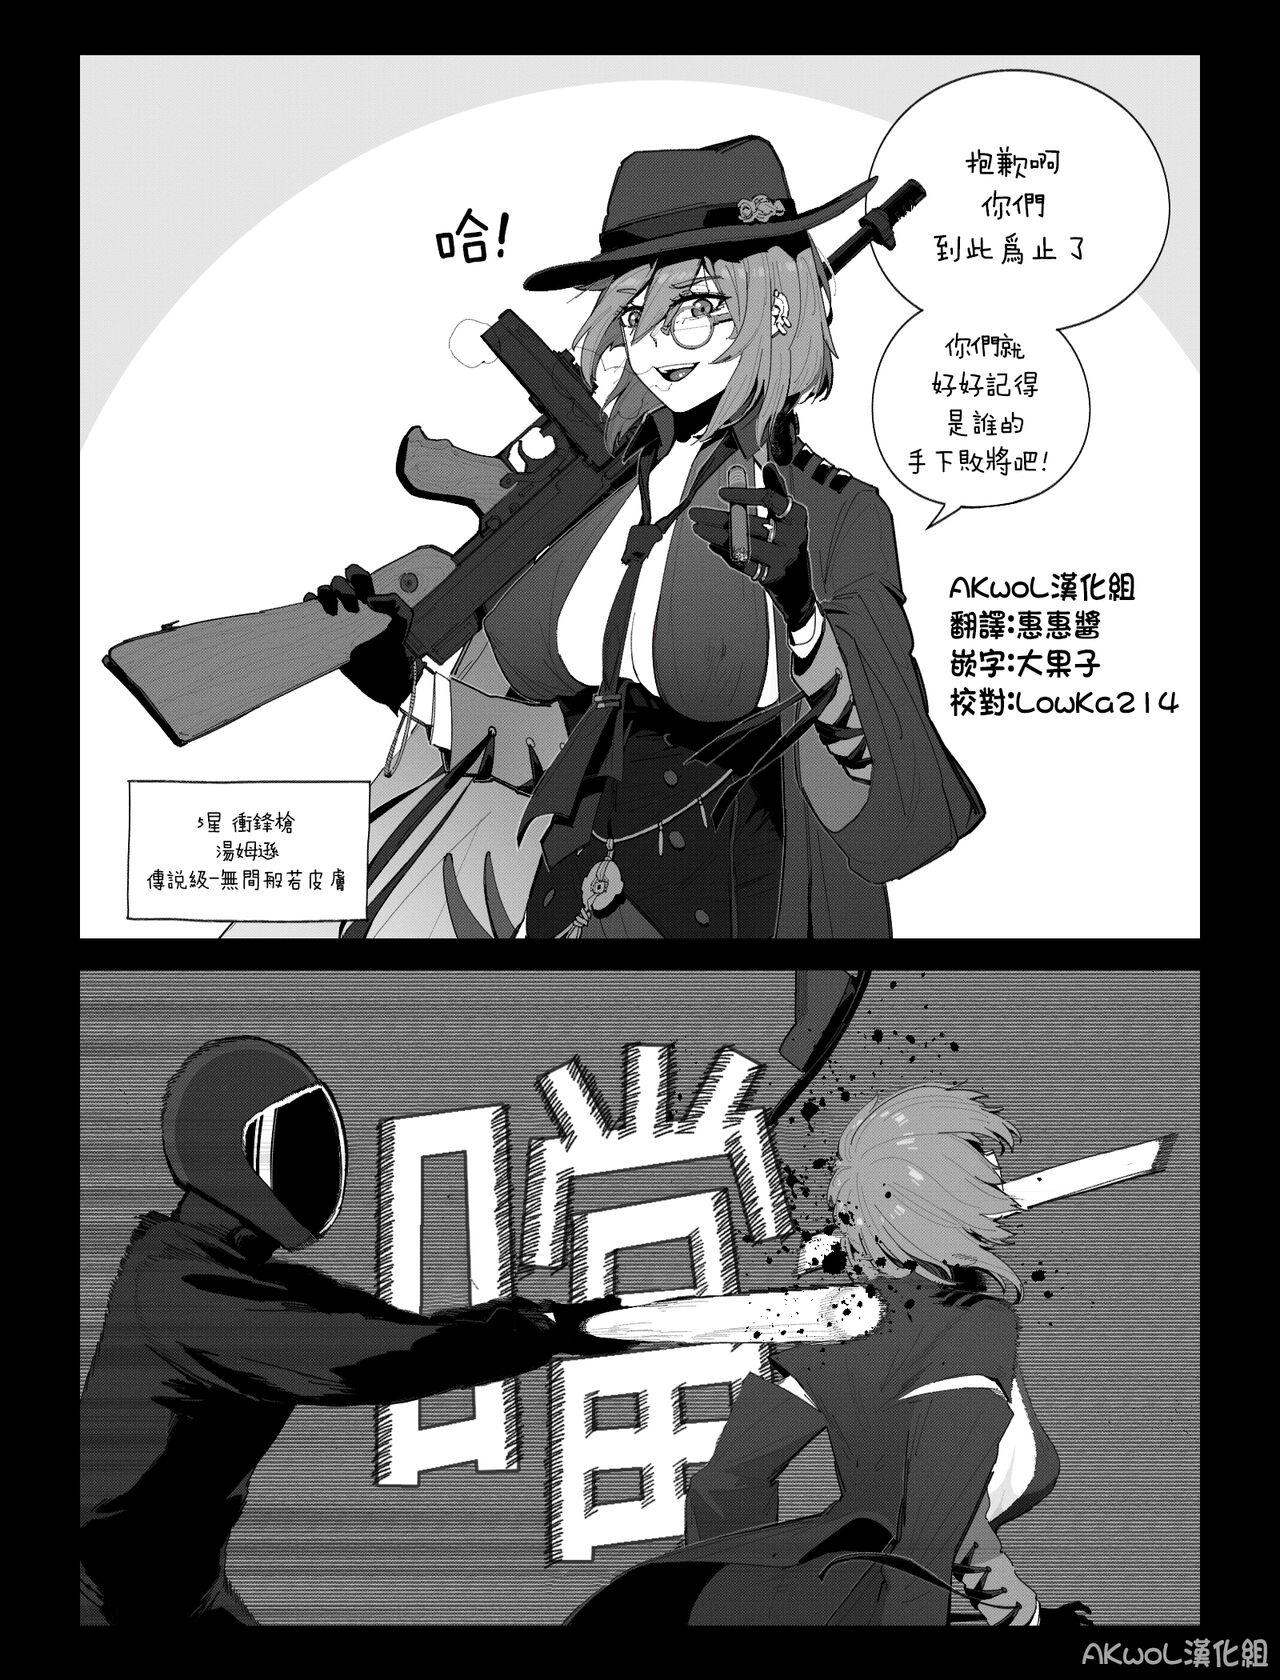 Village Thompson NSFW - Girls frontline Asians - Page 1